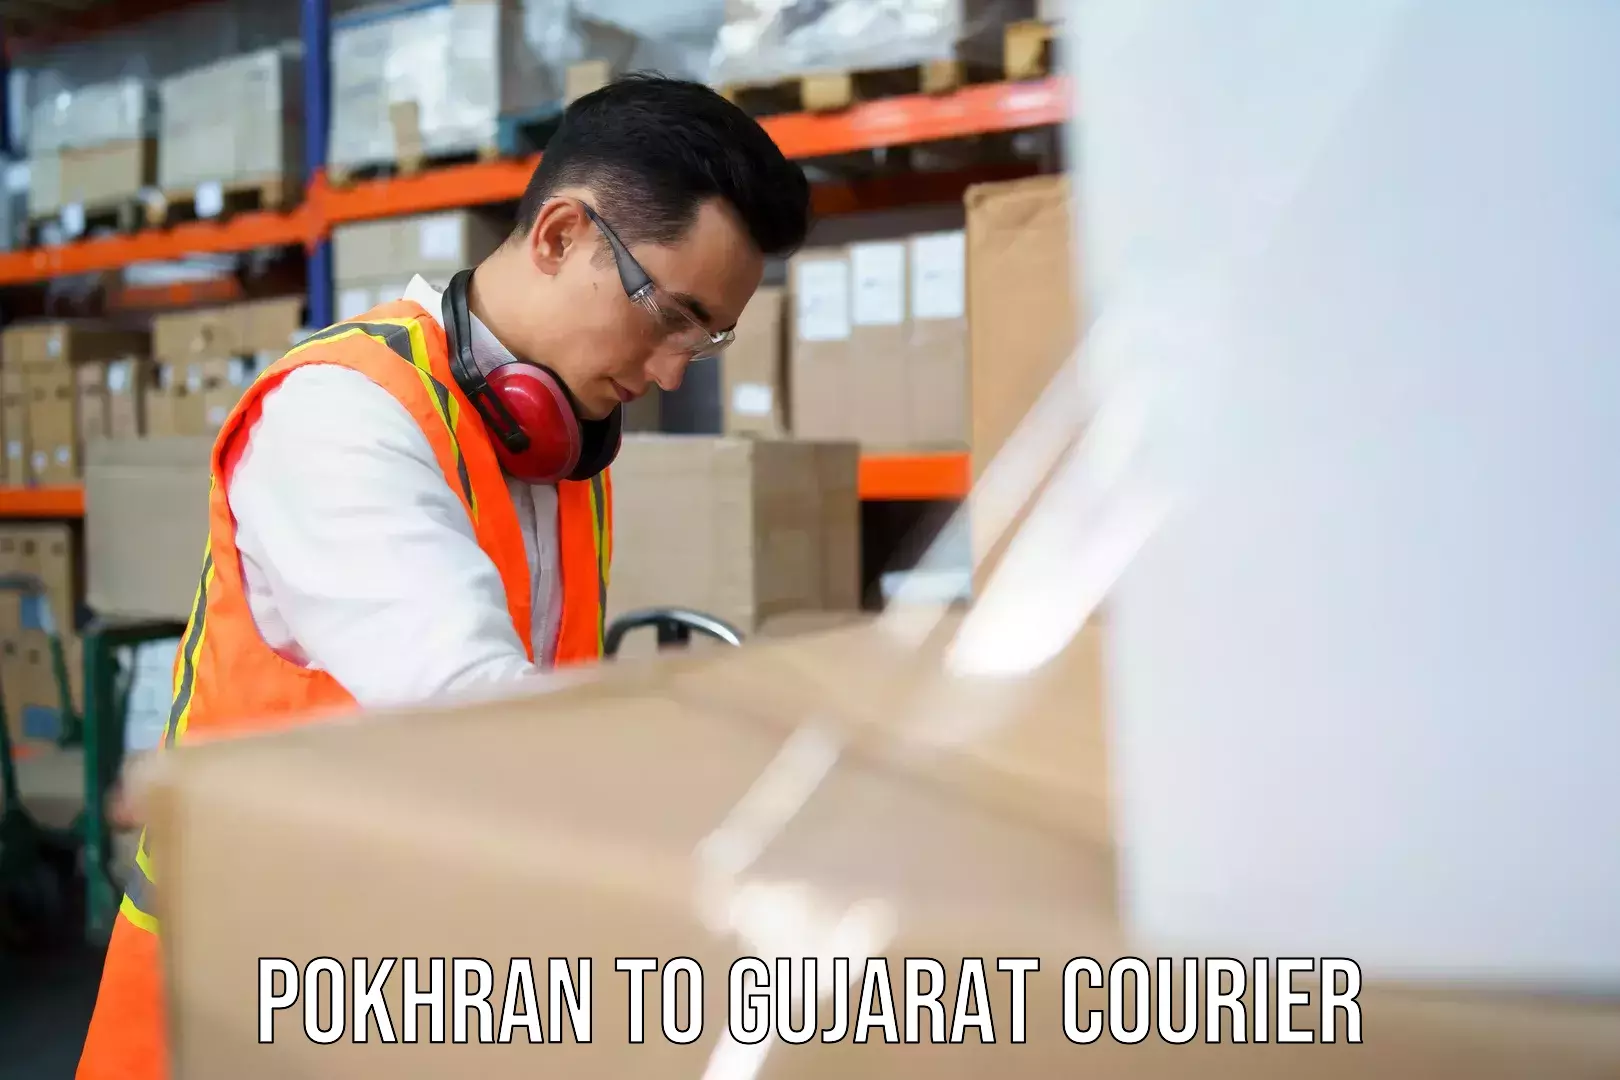 Professional courier handling Pokhran to Dhasa